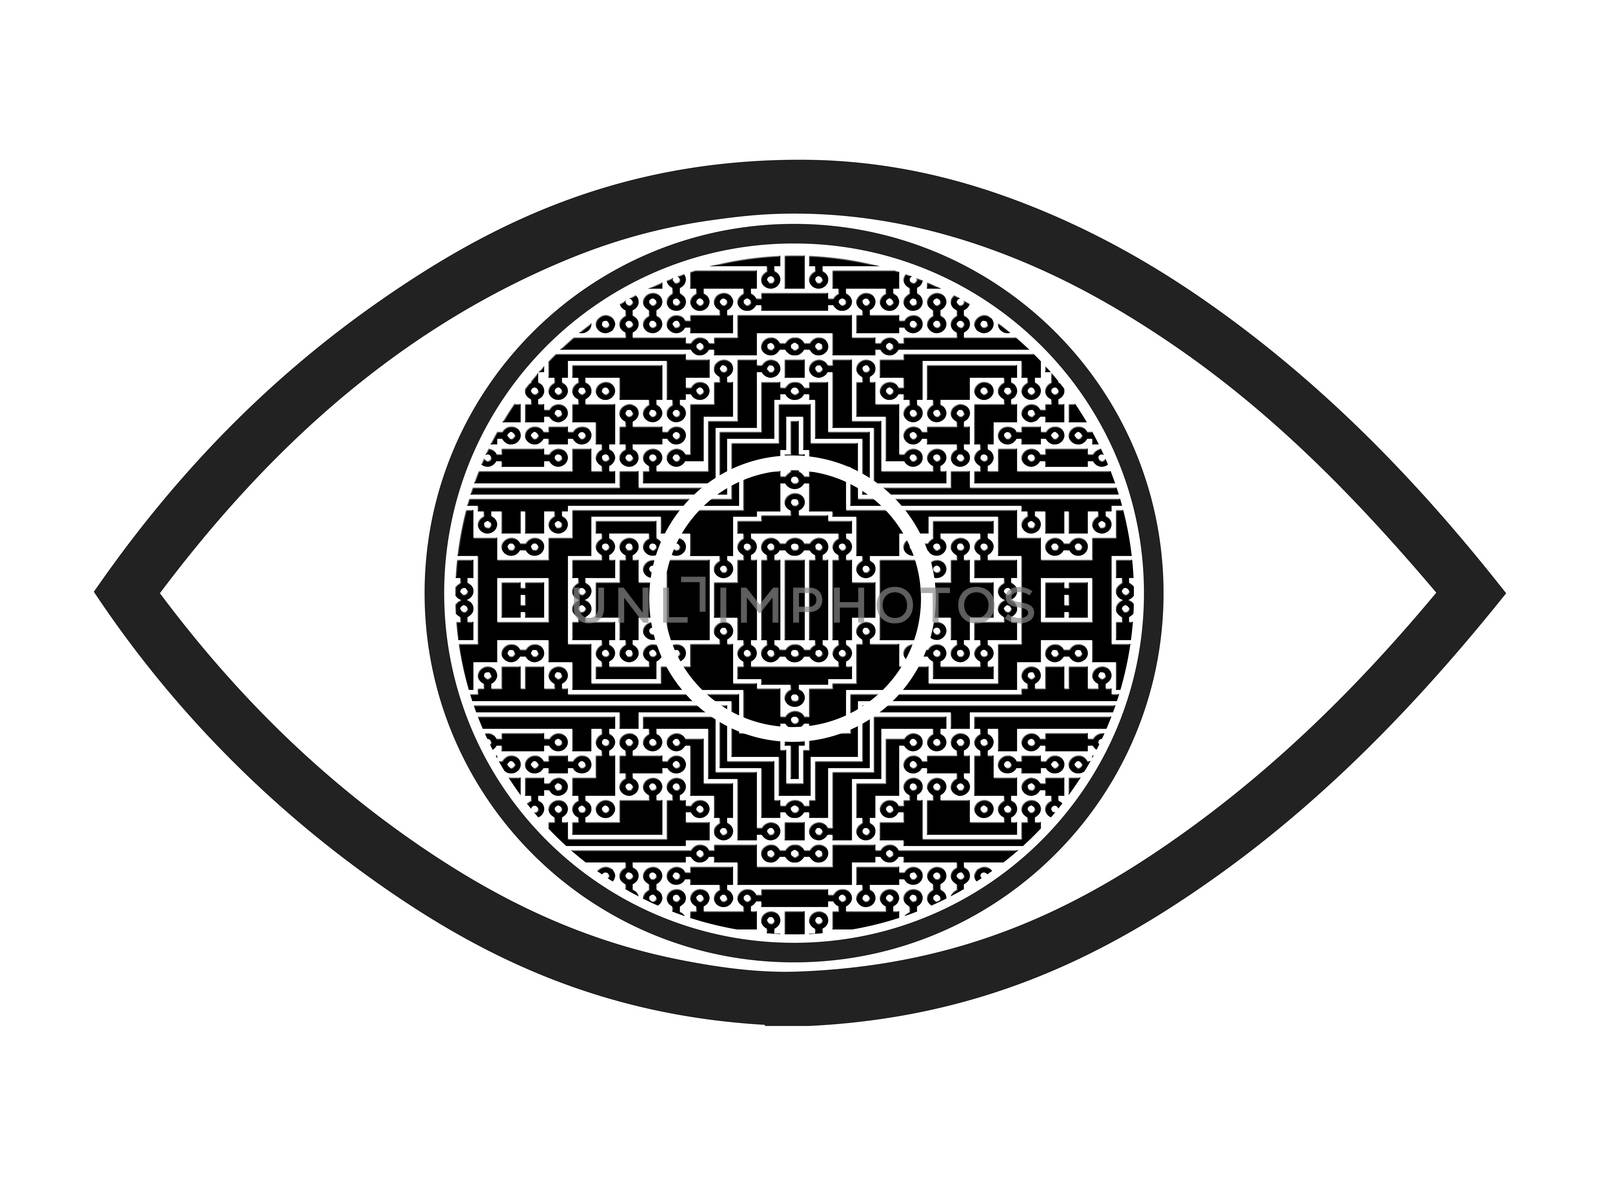 Concept sign and symbol for a visual prosthesis intended to restore functional vision in case of blindness